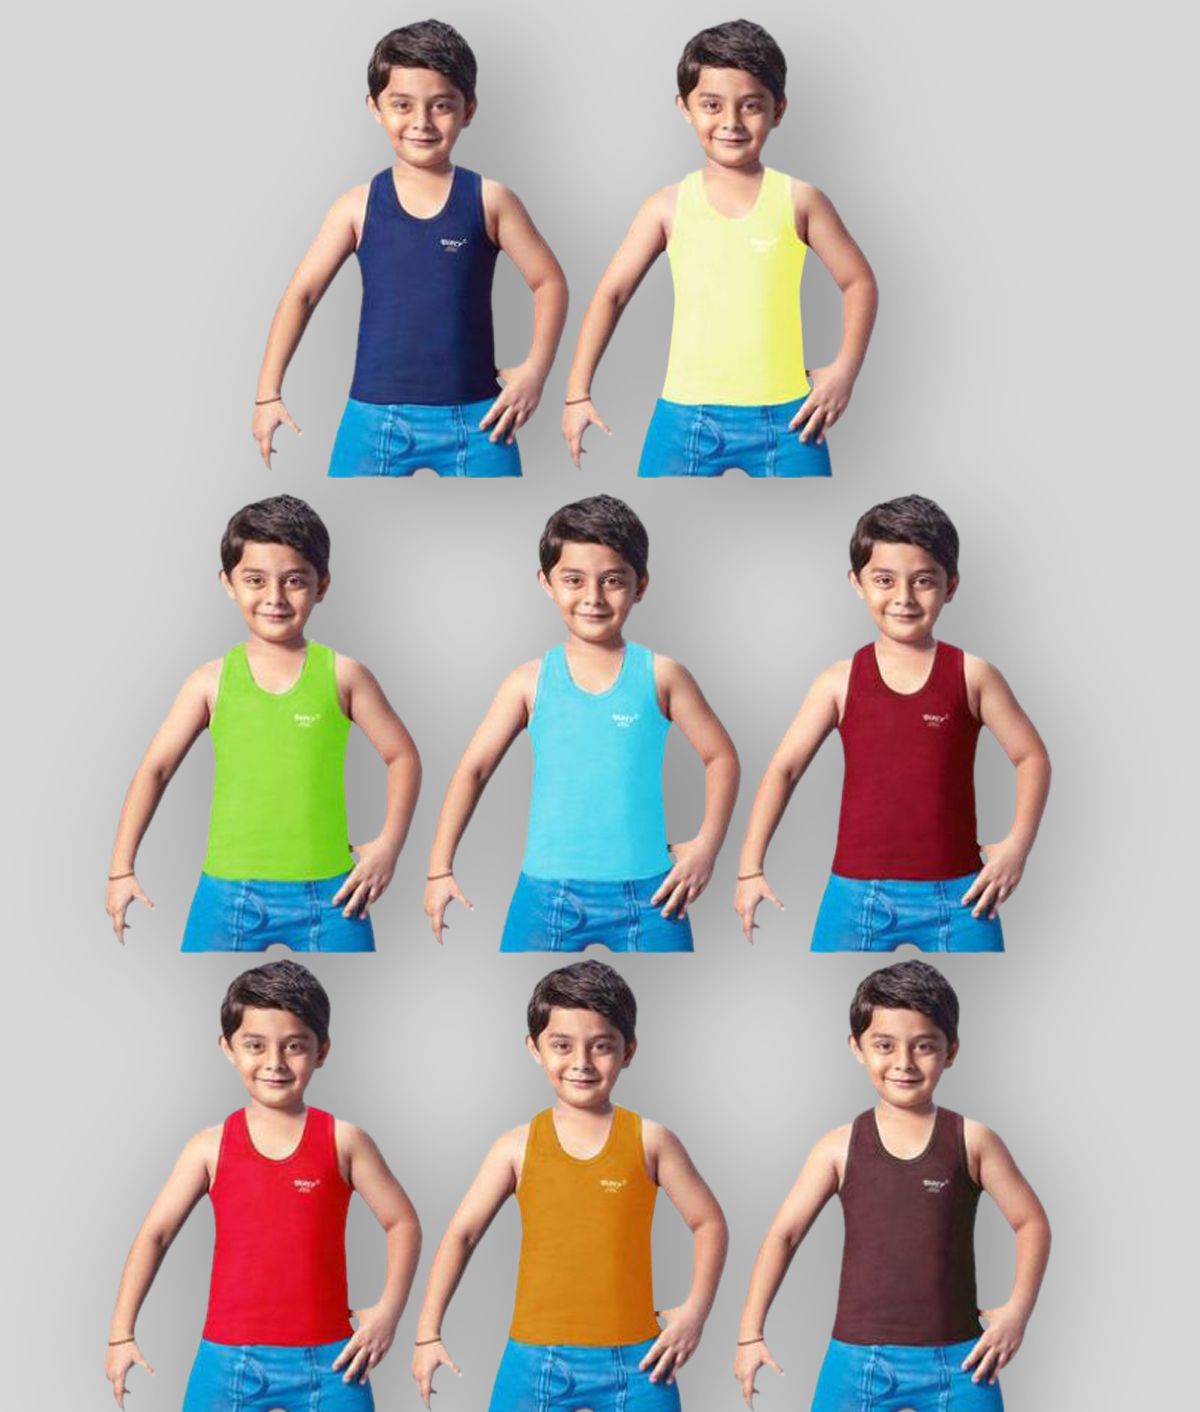     			Dixcy Josh Fine Cotton Multicolor Sleeveless Vests for Kids/Boys - Pack of 8